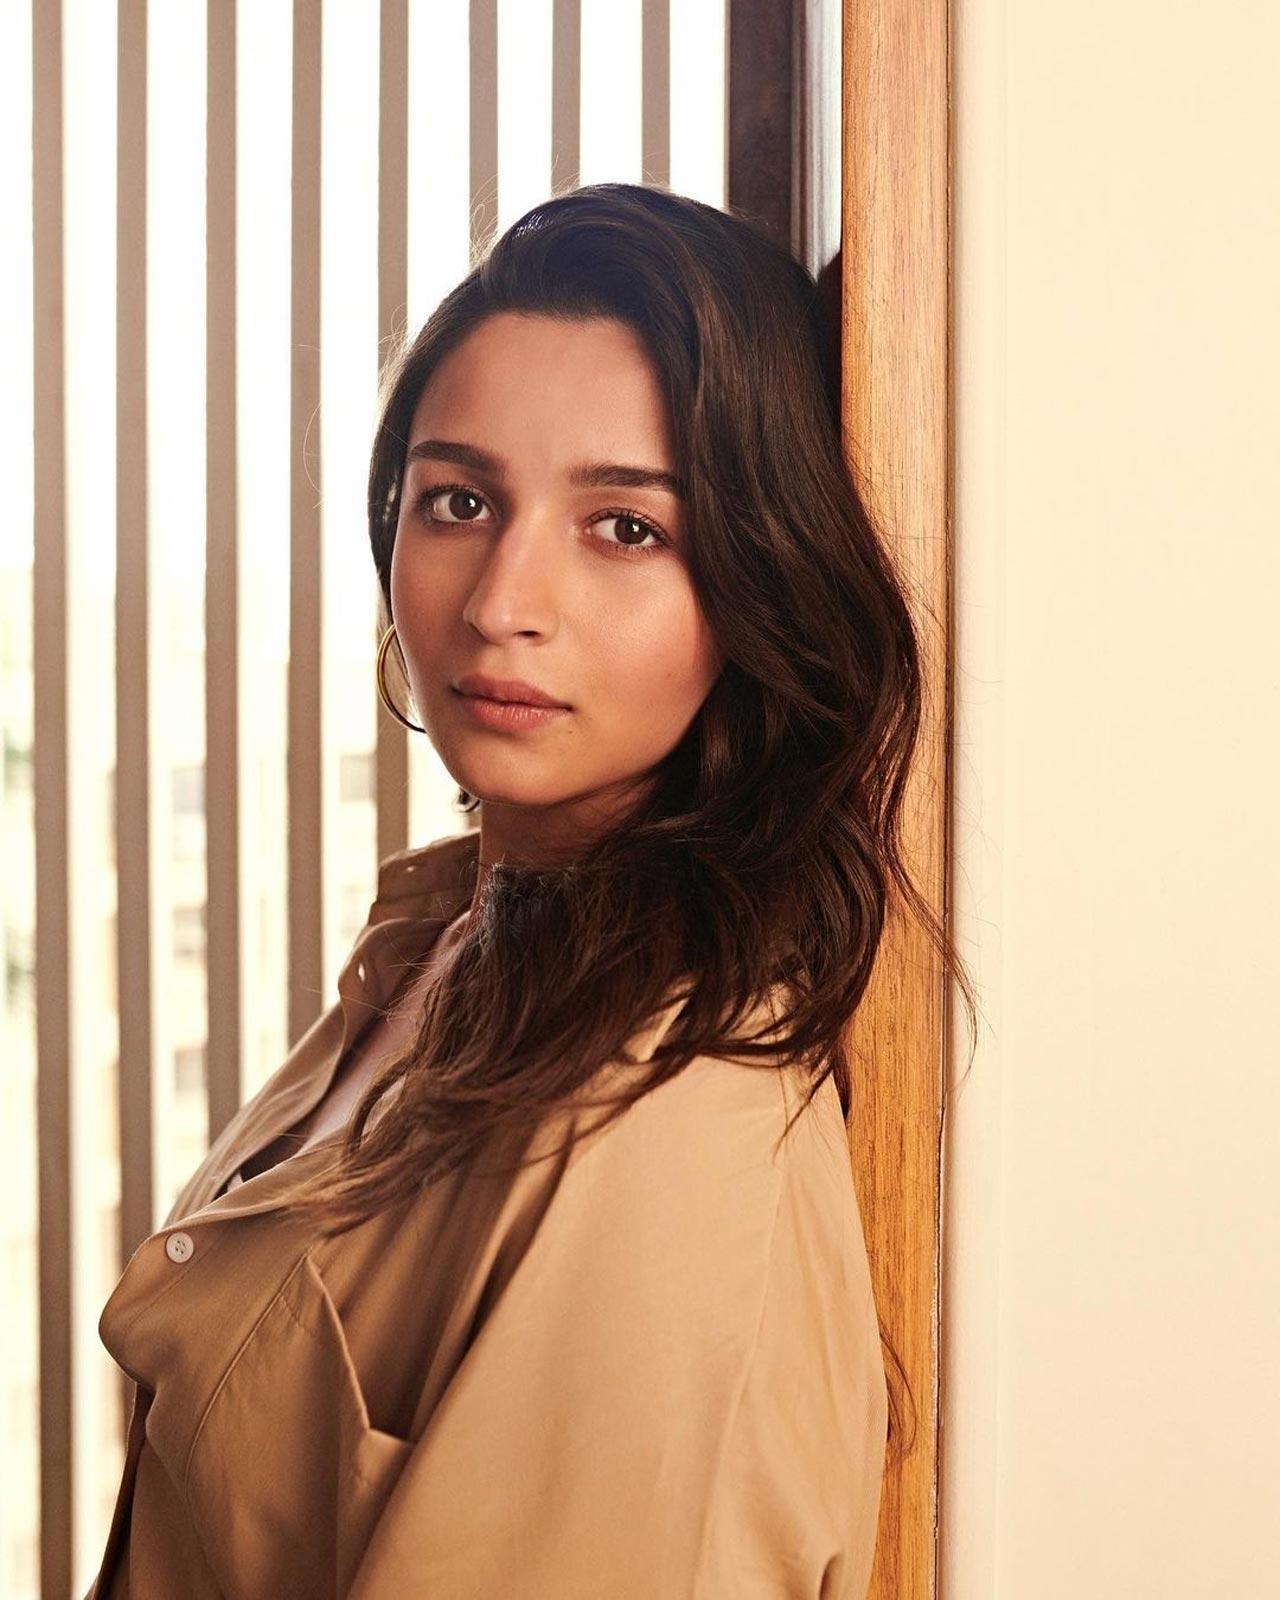 Alia will next be seen sharing the screen with Ayan Mukherji's 'Brahmastra: Part 1 Shiva'. The film is set to hit the theatres on September 9. Apart from Ranbir and Alia, 'Brahmastra Part One: Shiva' also stars Amitabh Bachchan, Mouni Roy, and south actor Nagarjuna in prominent roles. 'Brahmastra' was in limelight from the very day it was announced and it took over four years to get the production work done for this film